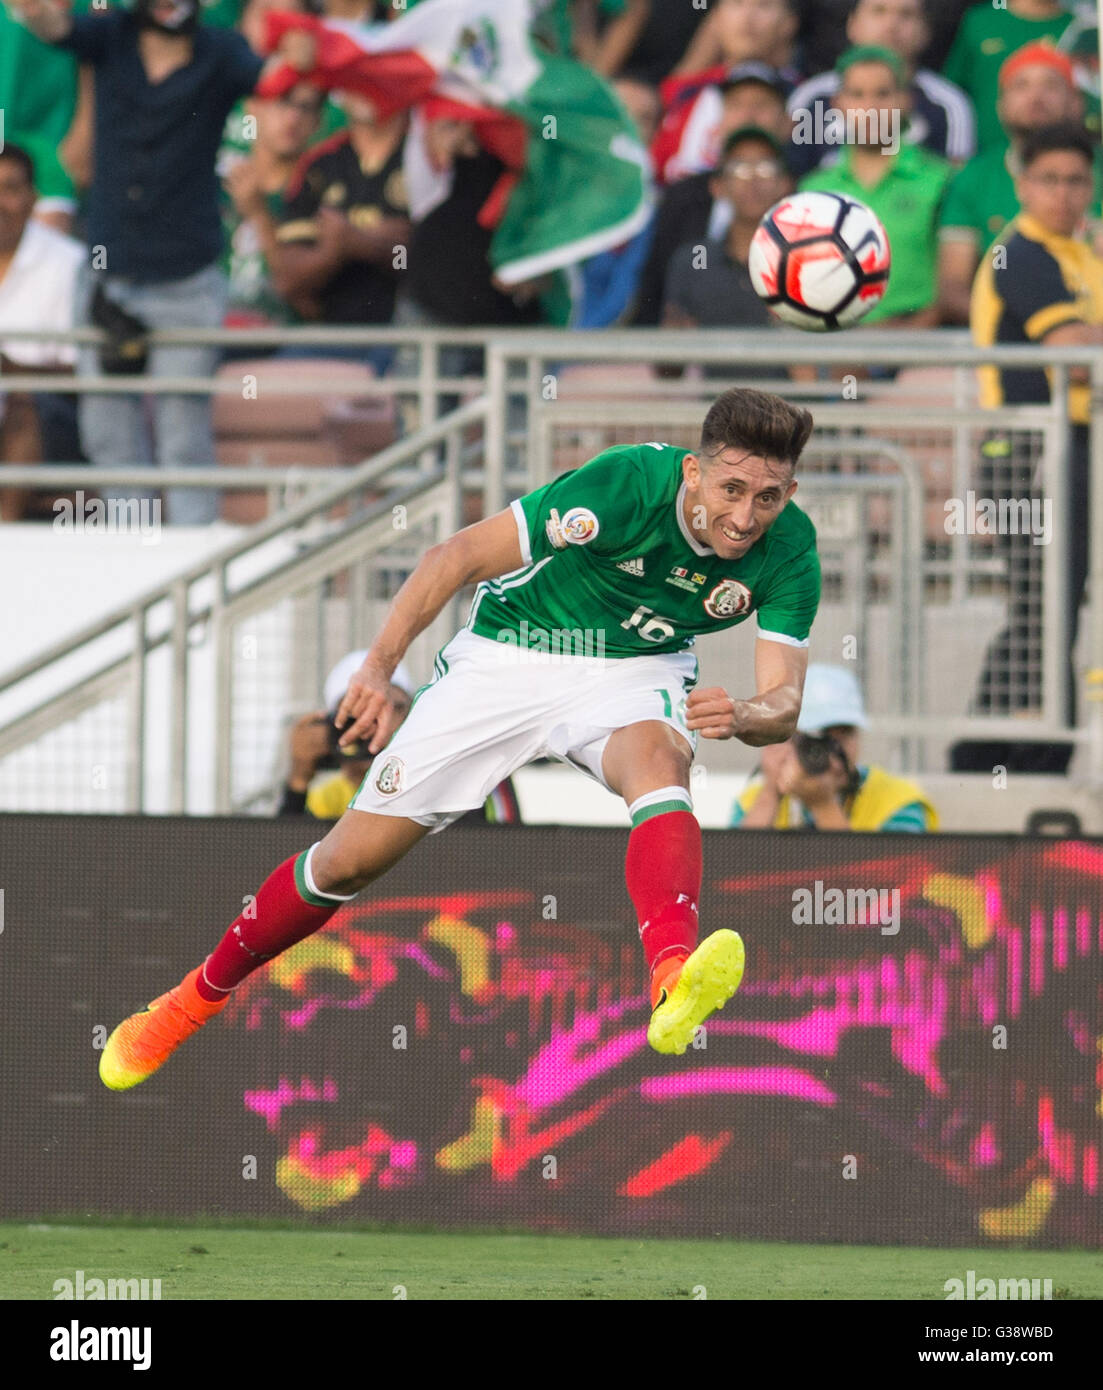 Pasadena, USA. 9th June, 2016. Mexico's Hector Herrera vies for the ball during the Copa America Centenario tournament Group C football match between Mexico and Jamaica in Pasadena, California, the United States, on June 9, 2016. Credit:  Yang Lei/Xinhua/Alamy Live News Stock Photo